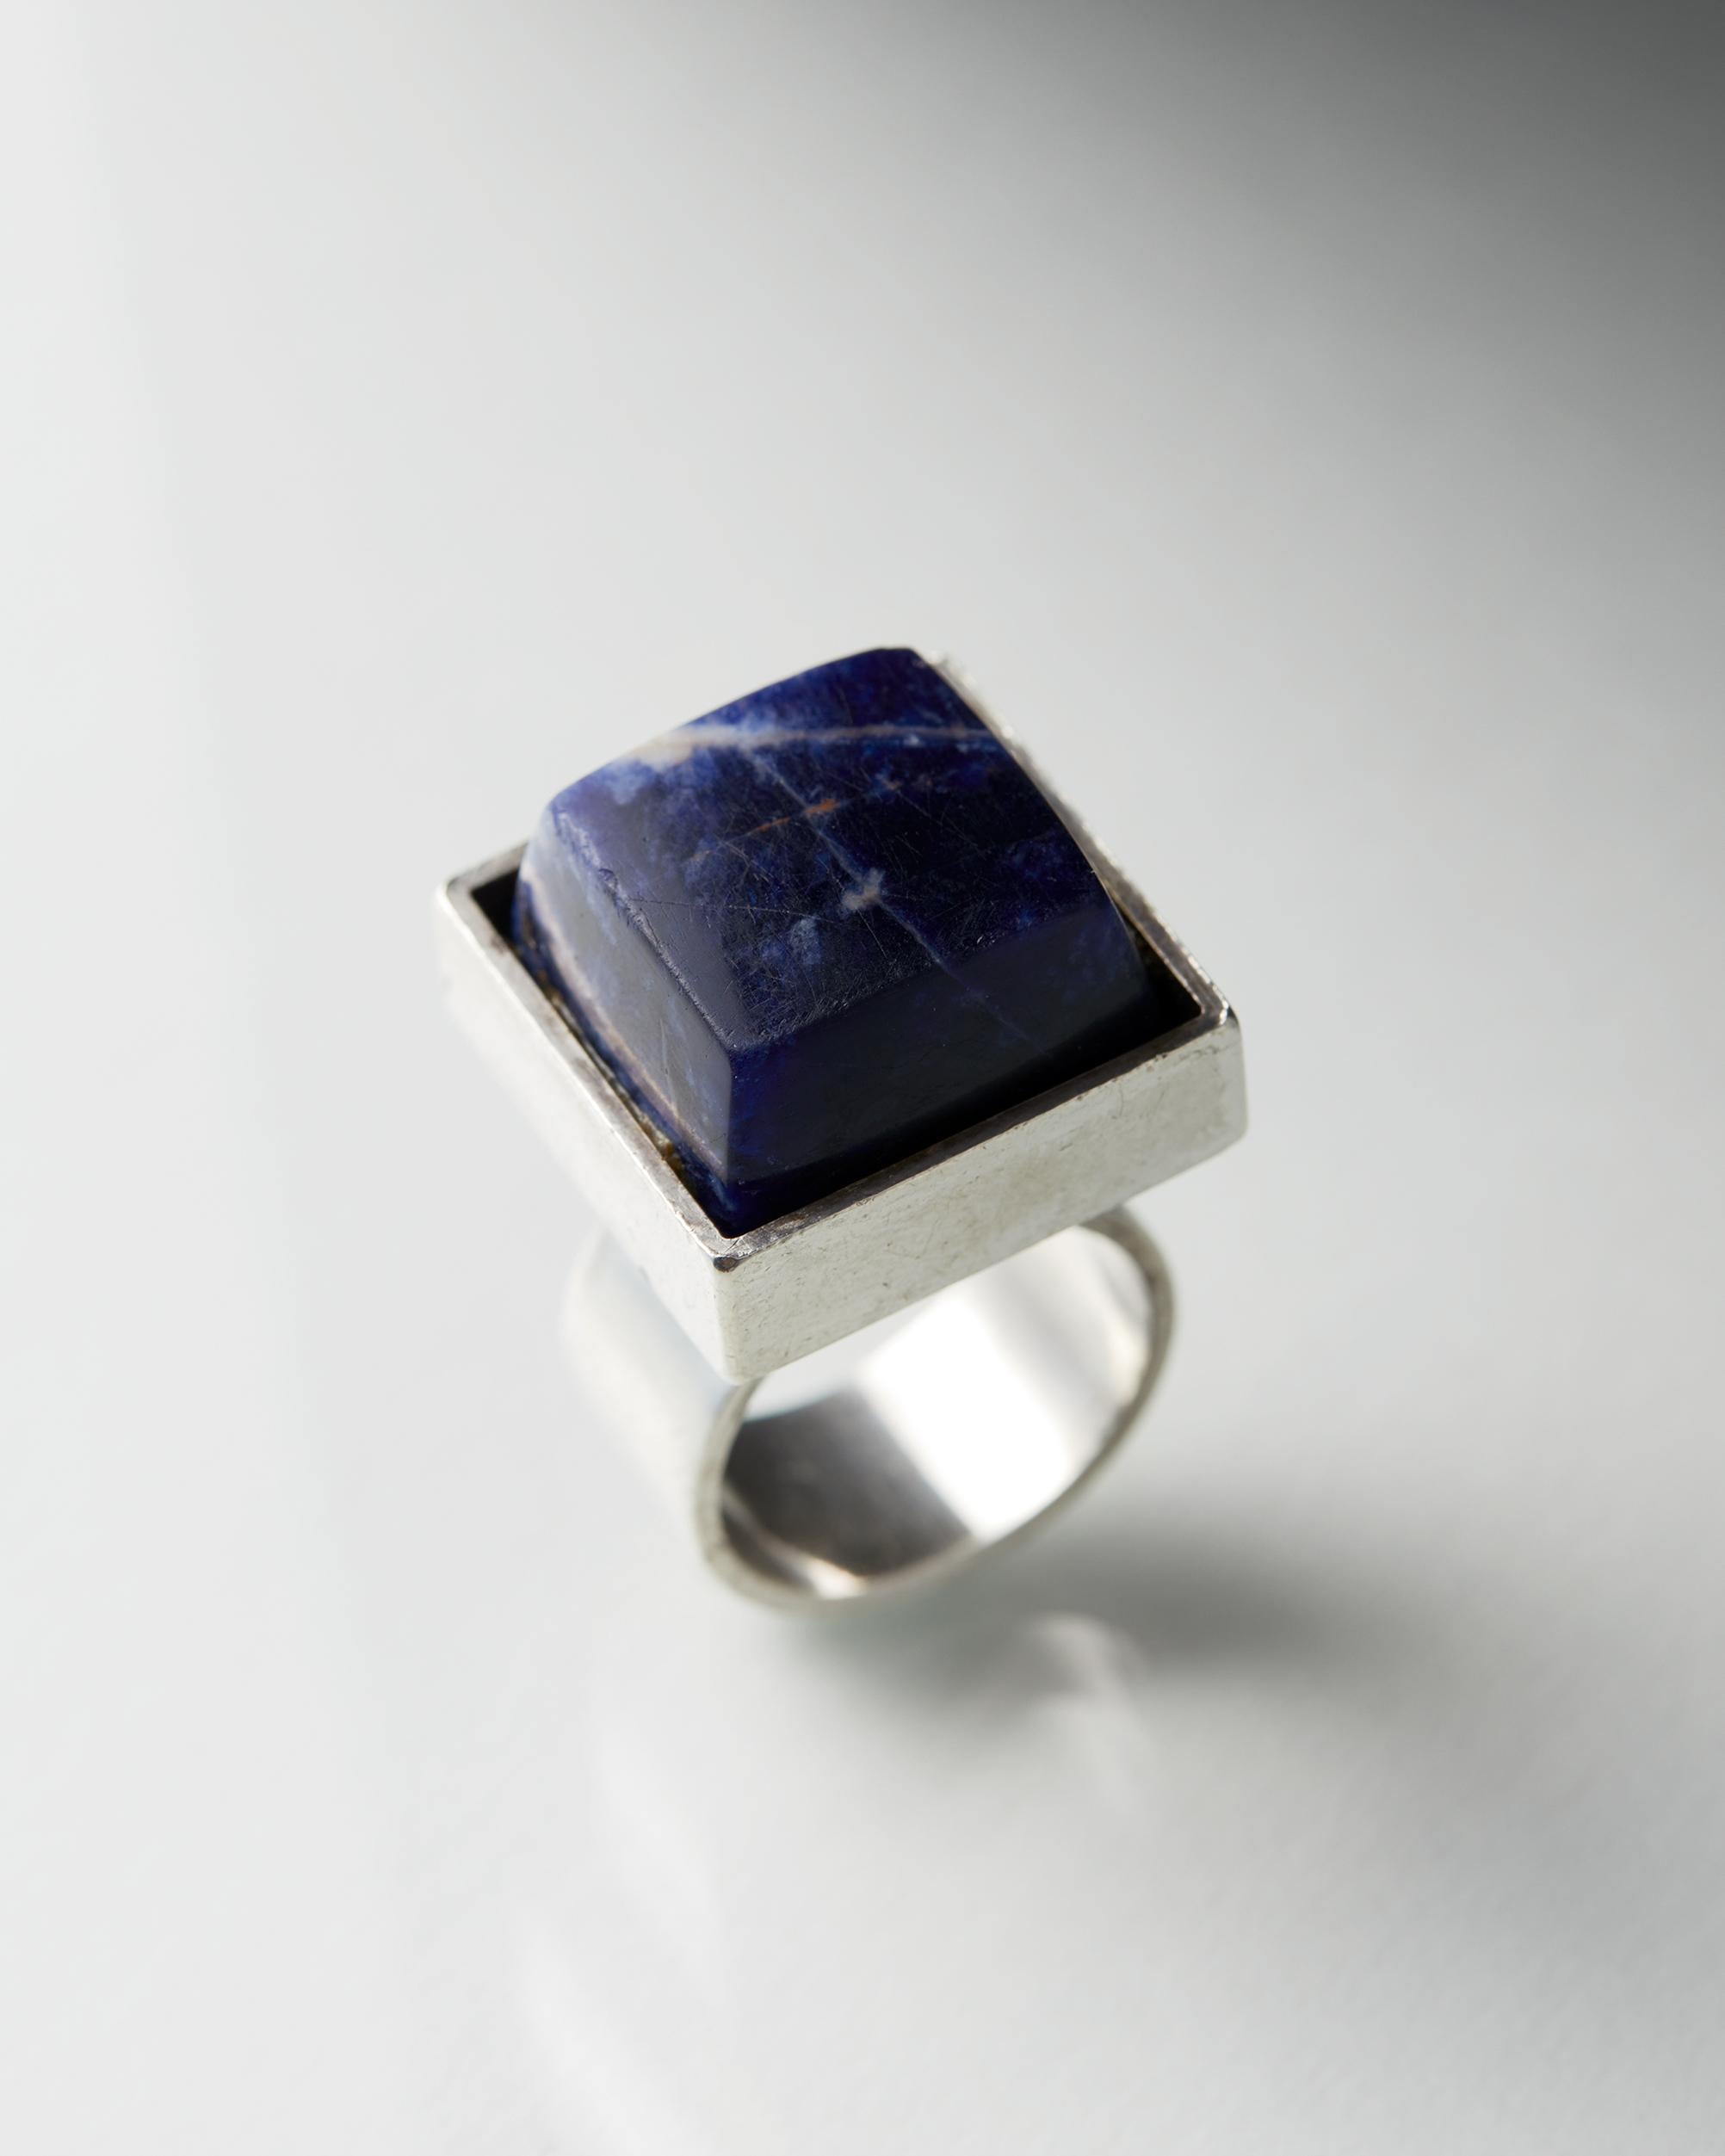 Sterling silver and sodalite stone.

Stamped.

H: 3.5 cm/ 1 3/4